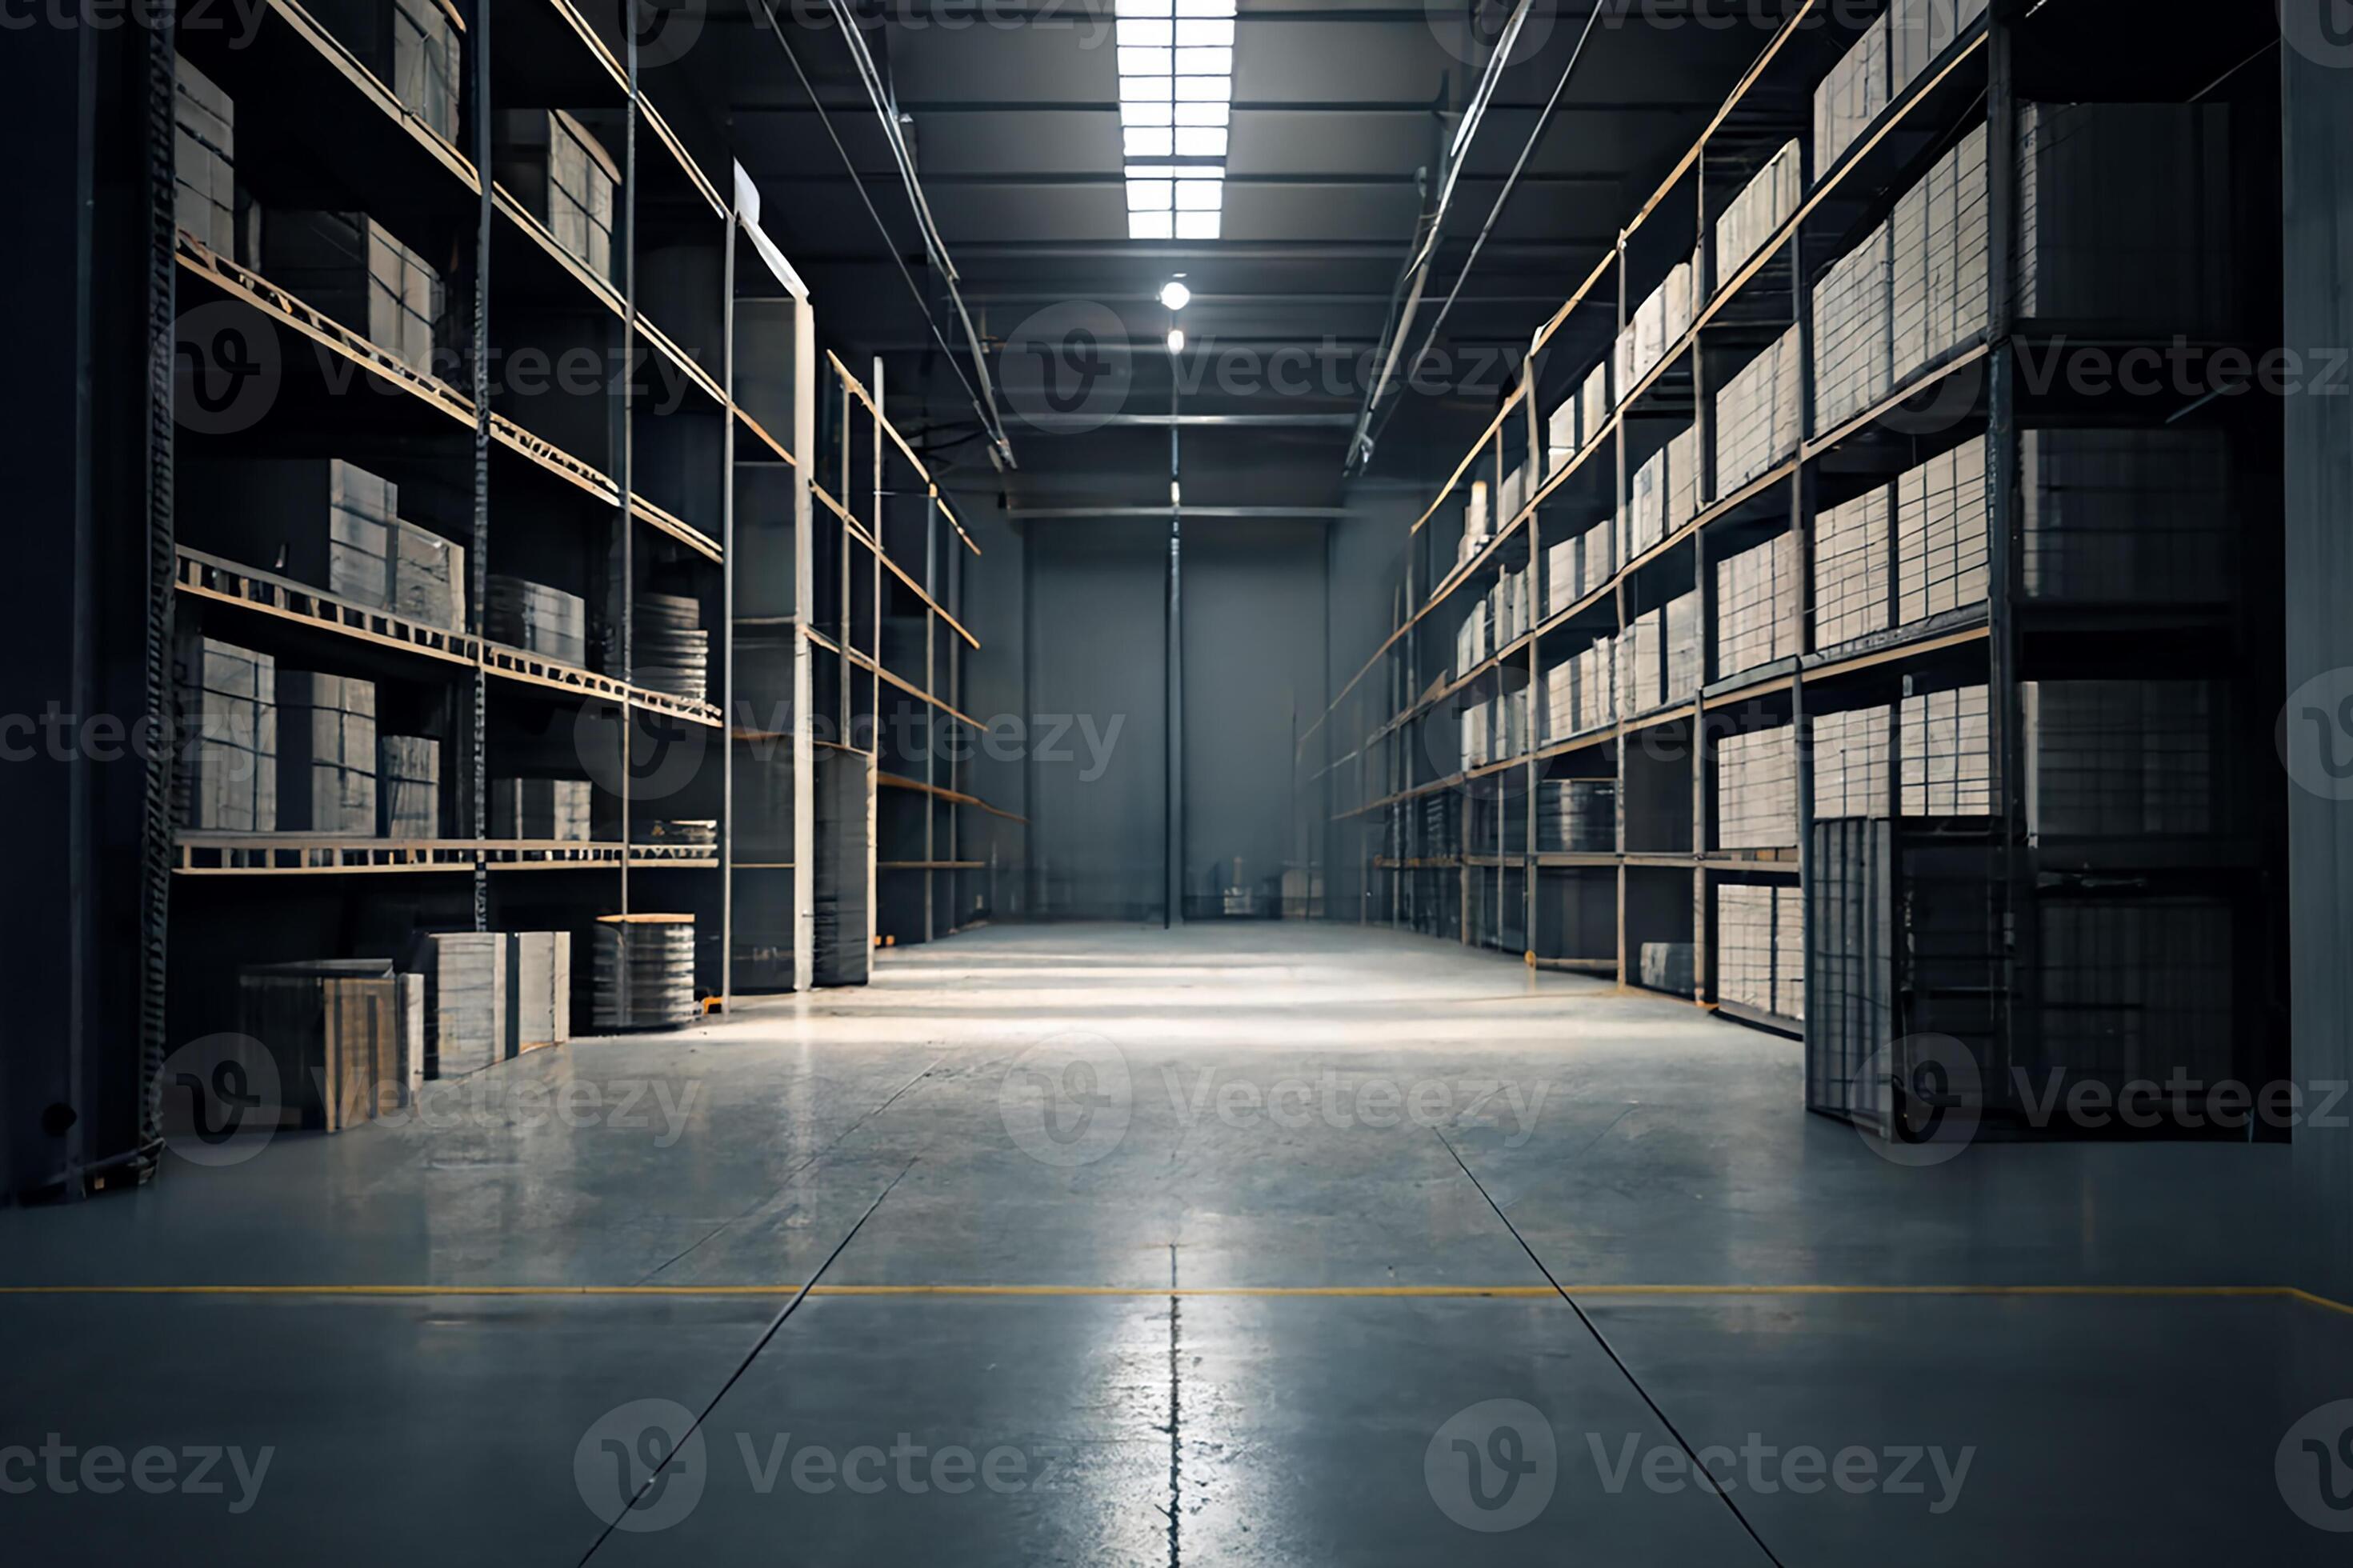 The interior of the Large Storage Room with shelves, racks, and